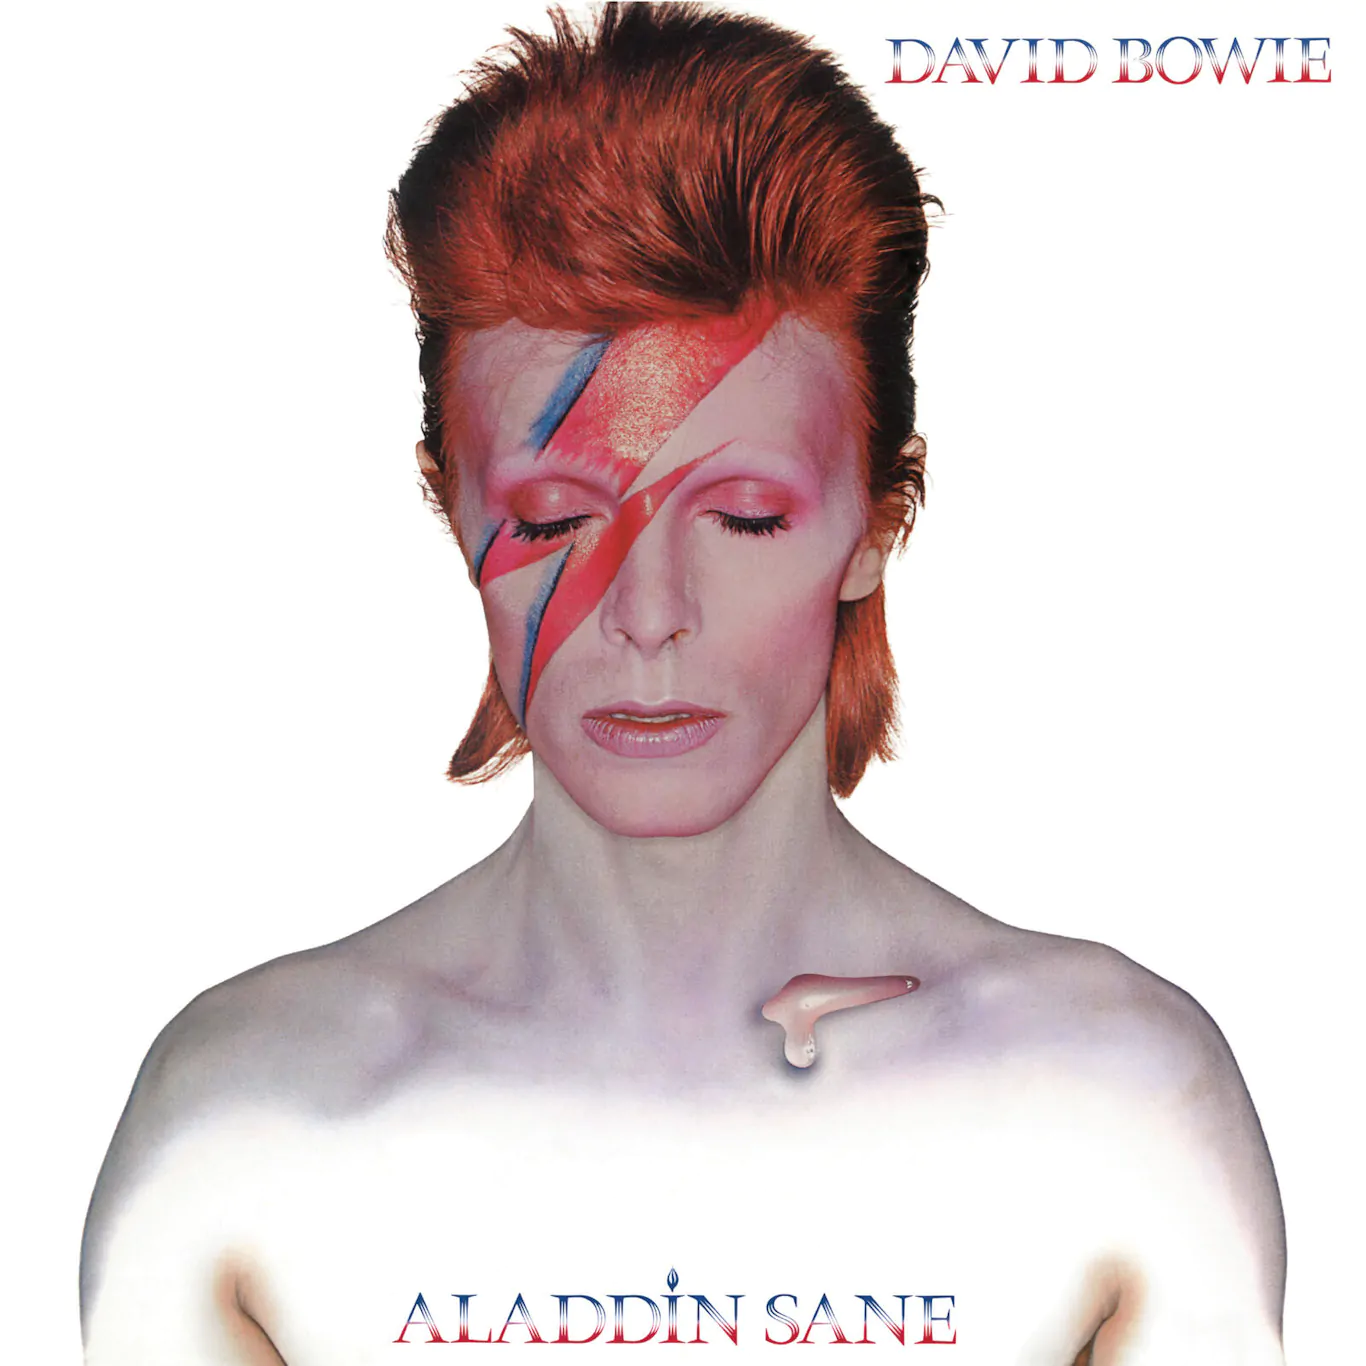 50th anniversary vinyl editions of DAVID BOWIE’s 1973 album ‘Aladdin Sane’ will be released in April